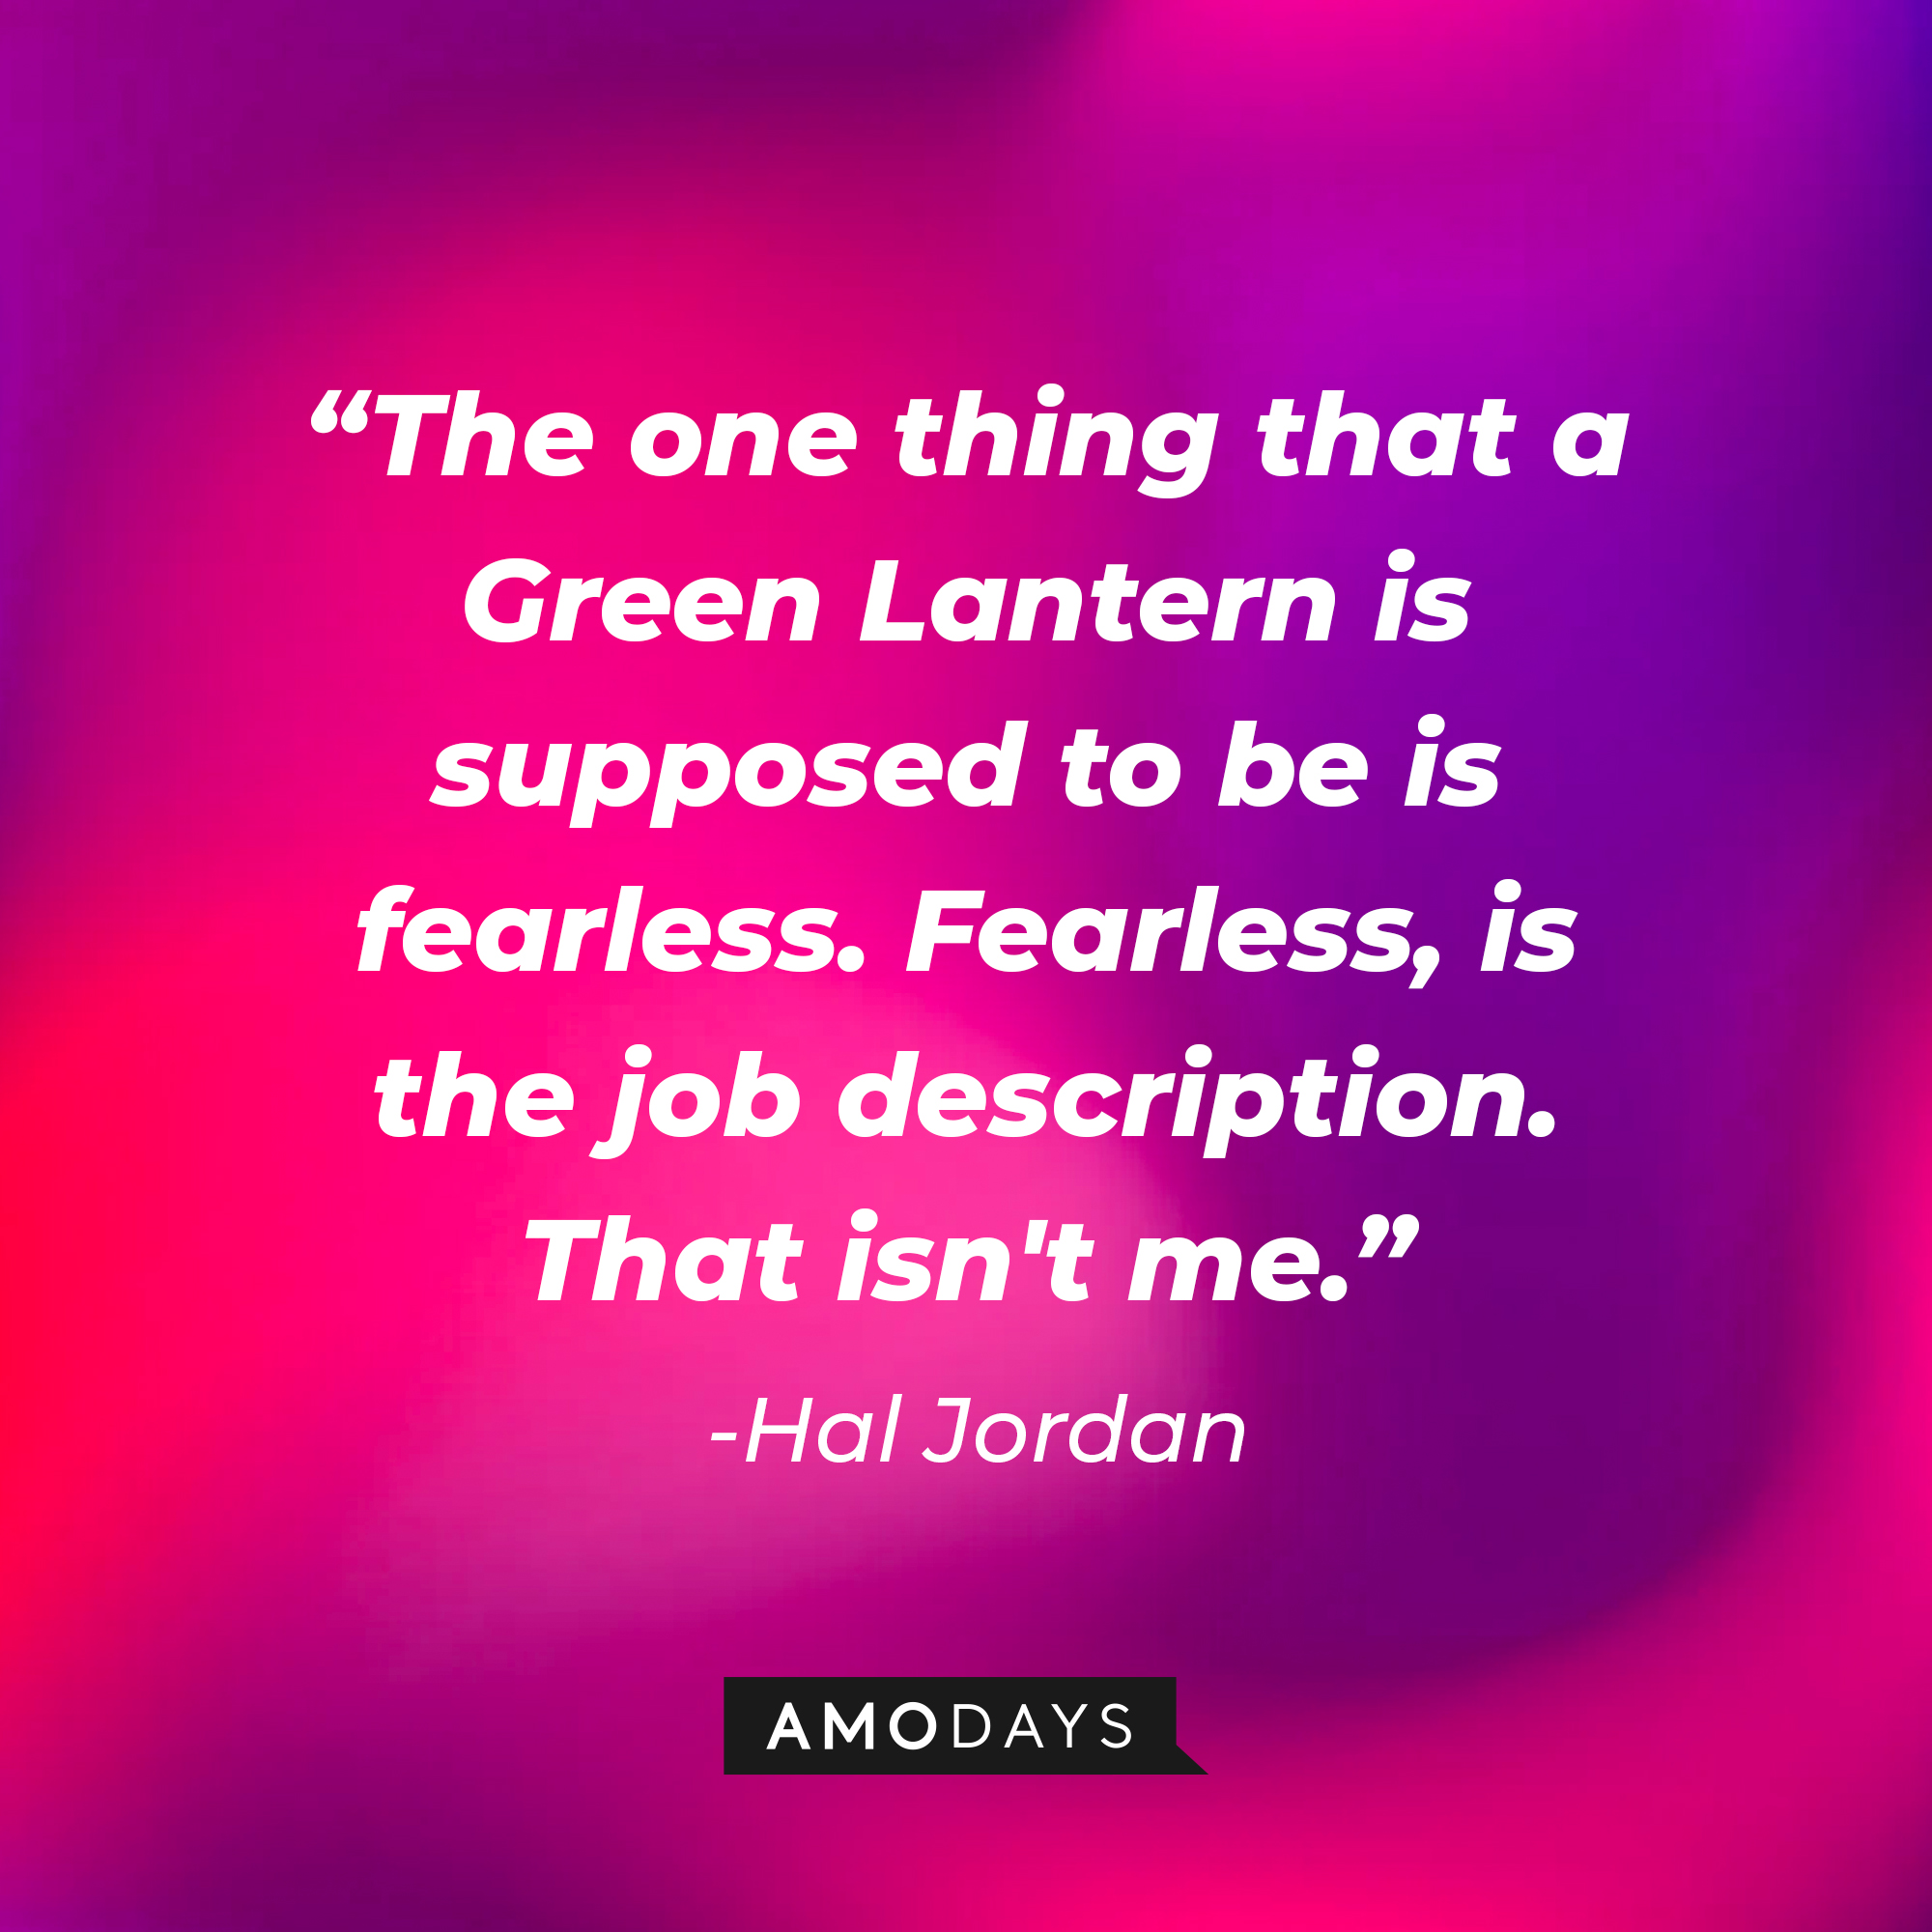 Hal Jordan's quote: "The one thing that a Green Lantern is supposed to be is fearless. Fearless, is the job description. That isn't me." | Source: AmoDays